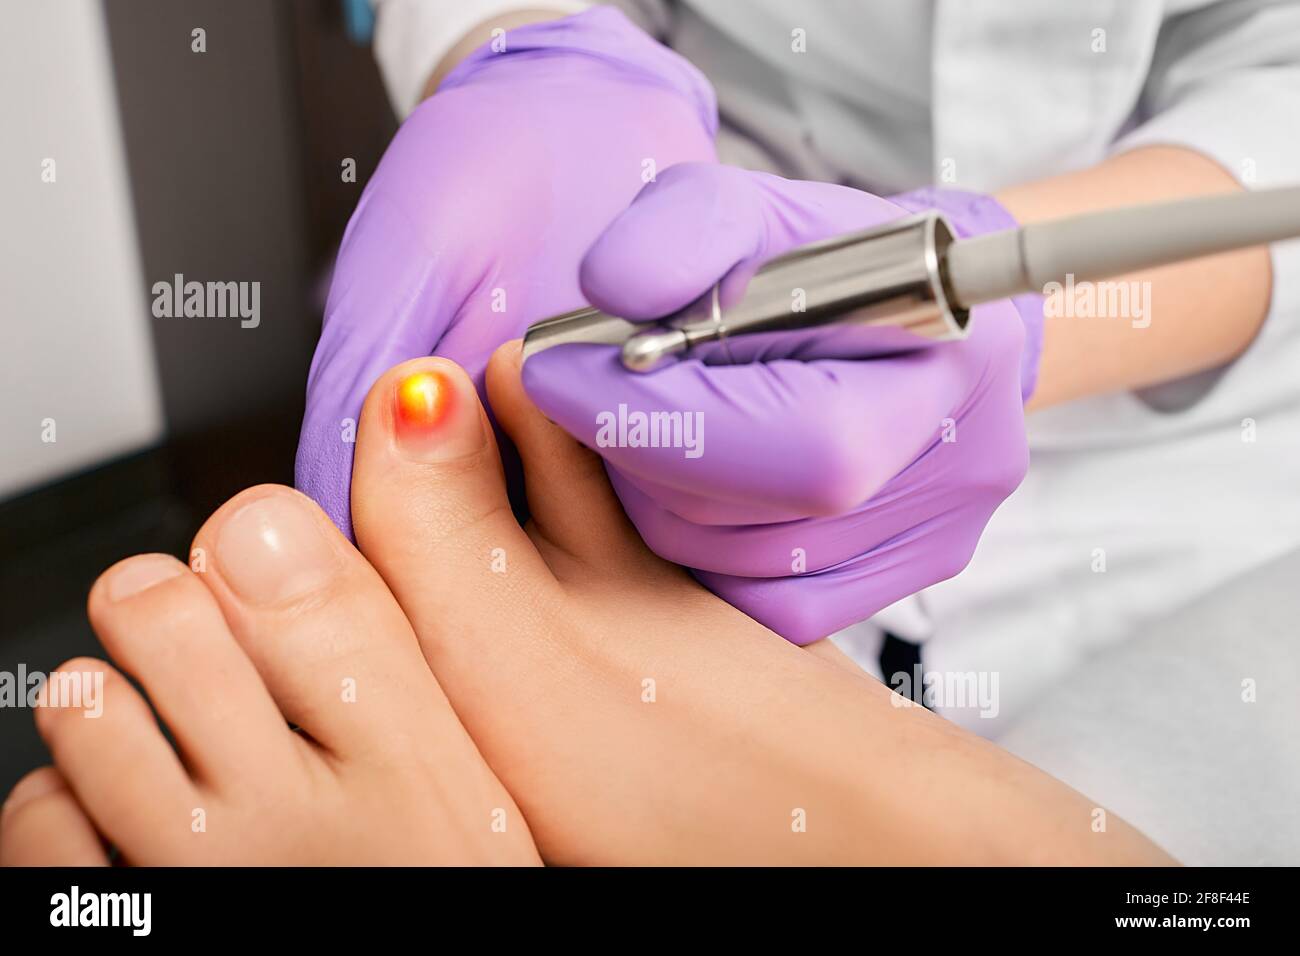 patient having laser treatment fungal infection on toenail, close-up. Onychomycosis treatment with a medical laser at a clinic Stock Photo